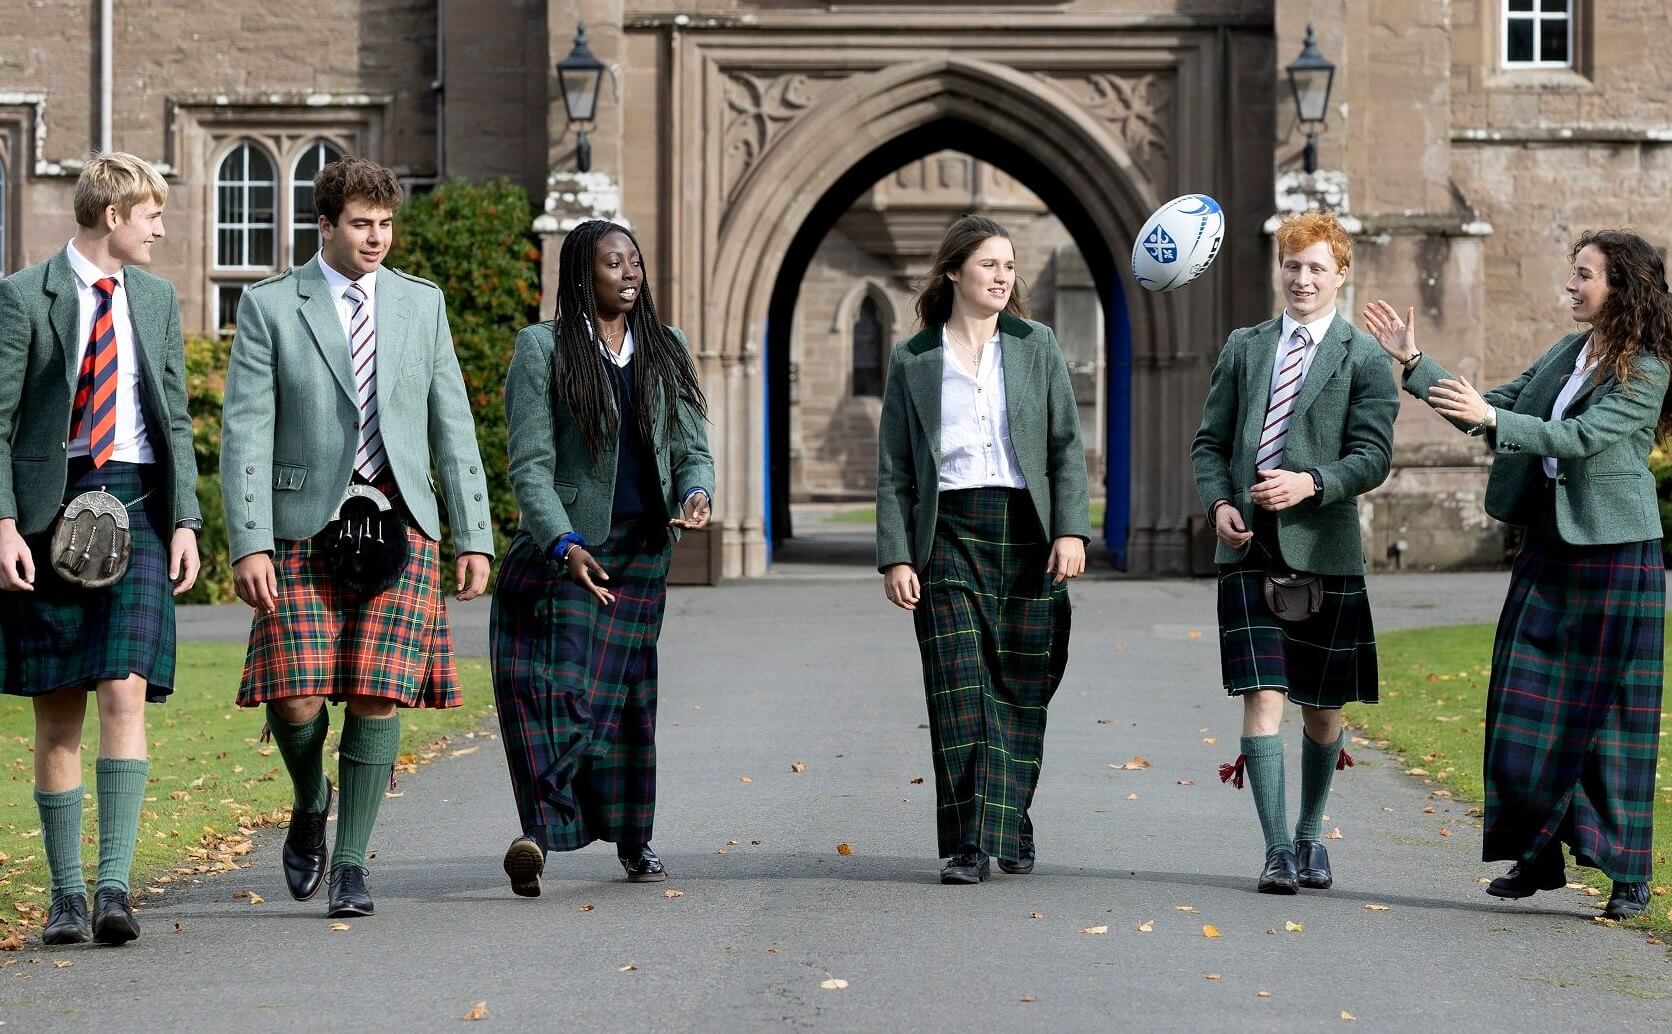 Glenalmond College: An extraordinary education in picturesque Scotland